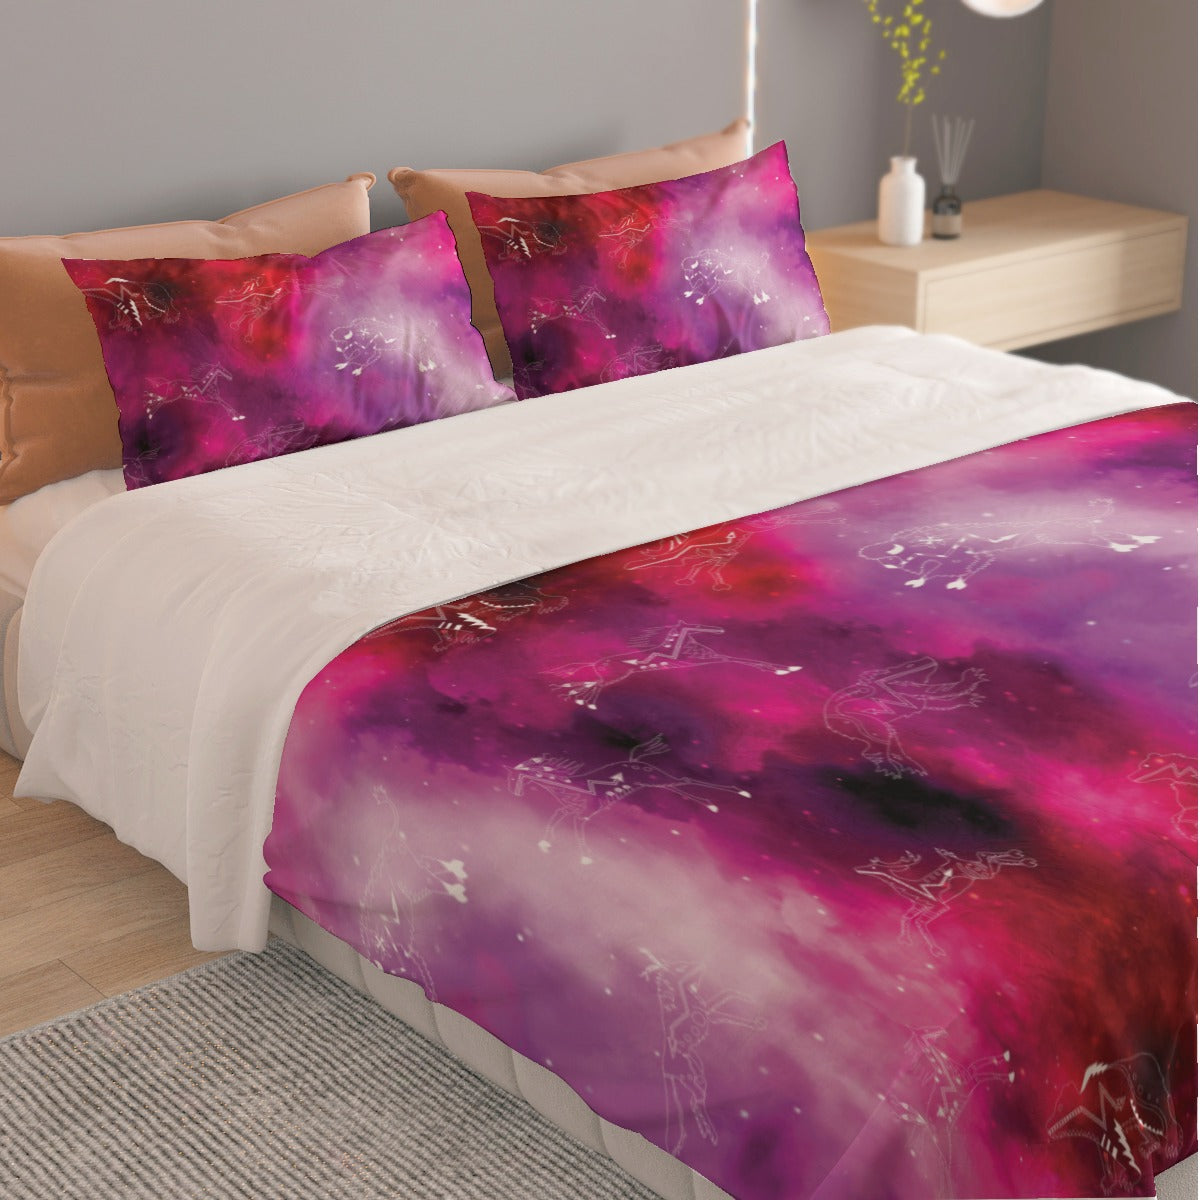 Animal Ancestors 8 Gaseous Clouds Pink and Red Bedding Set